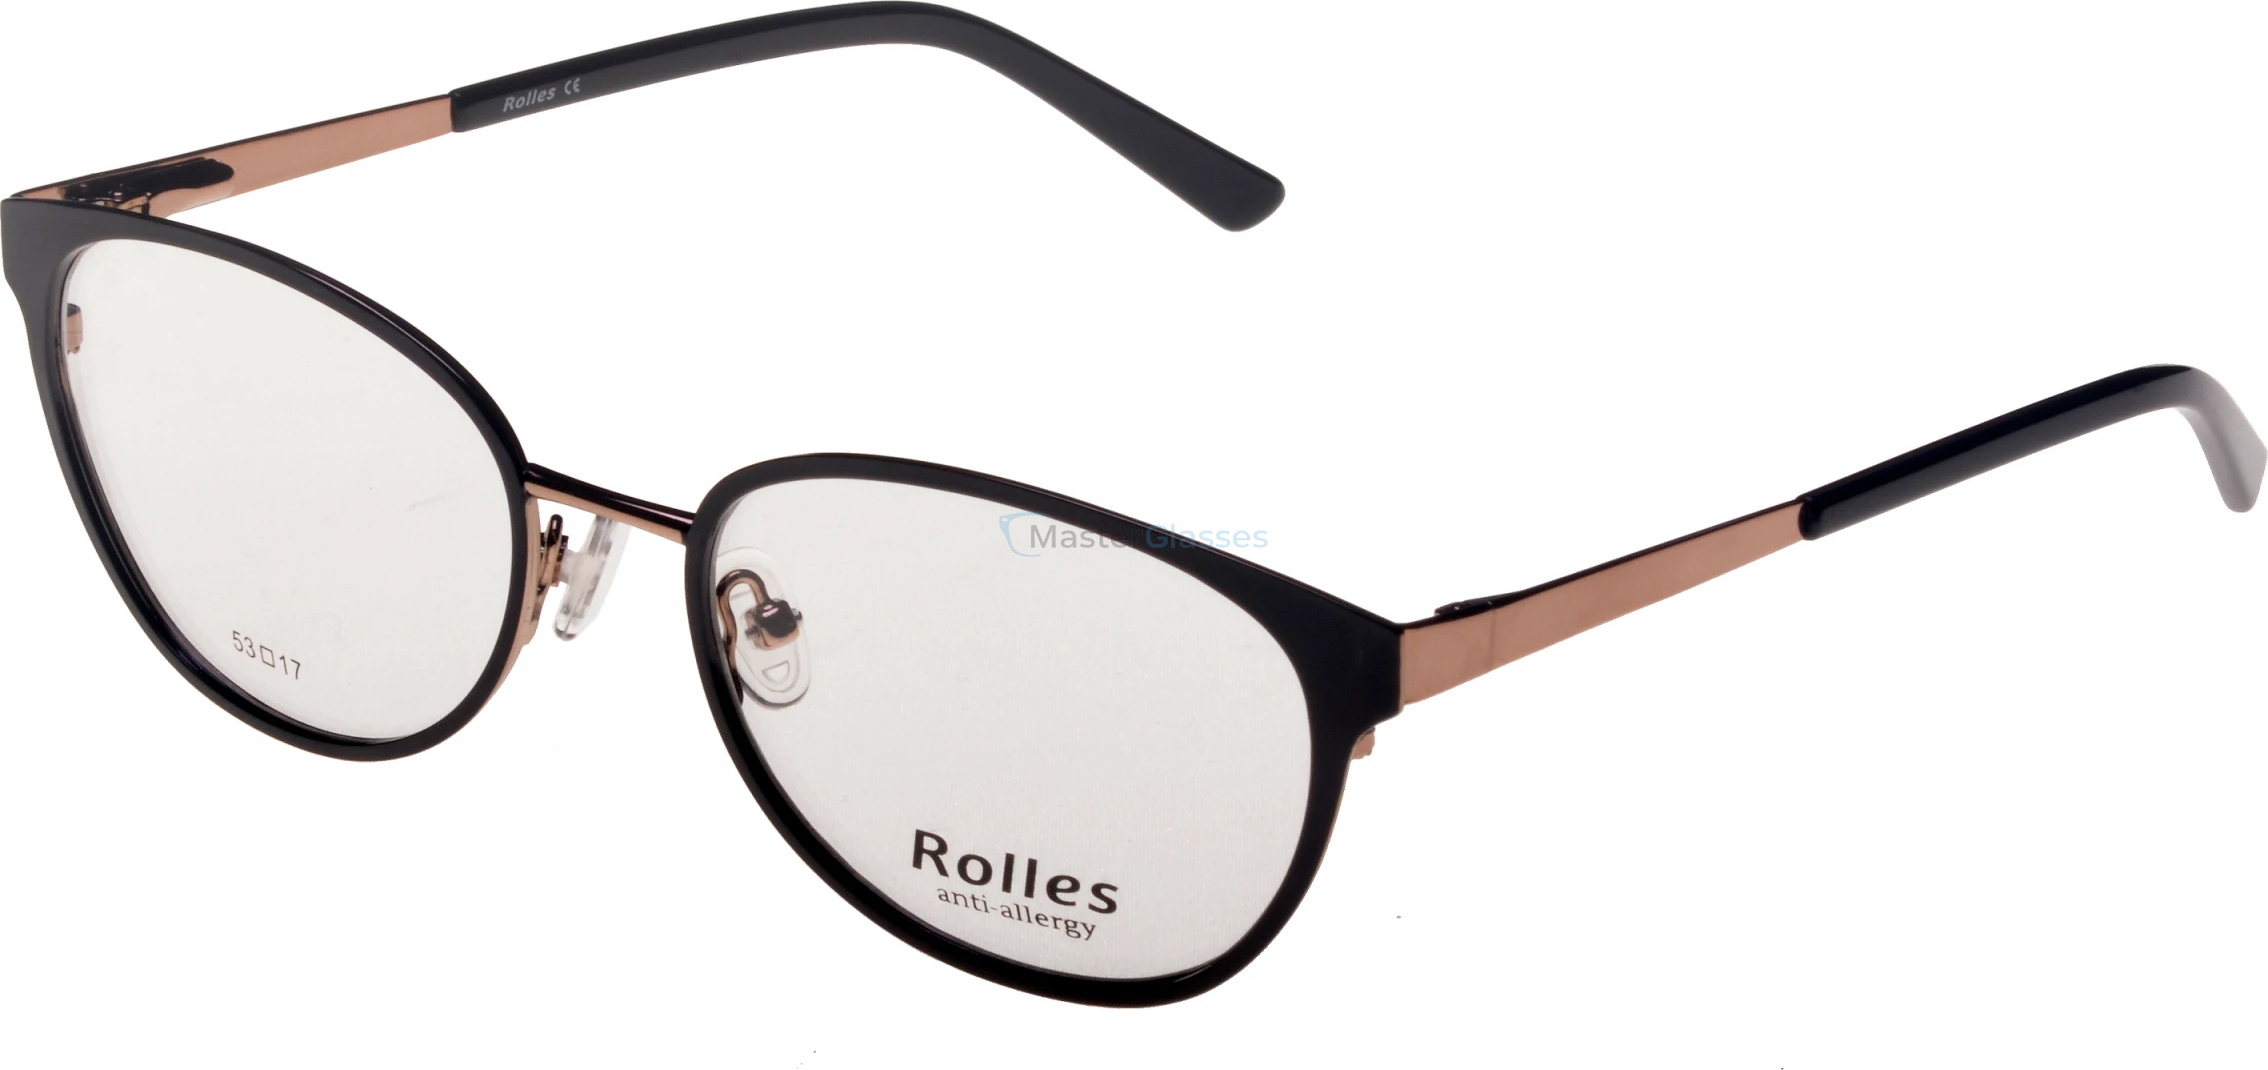  Rolles 689 02